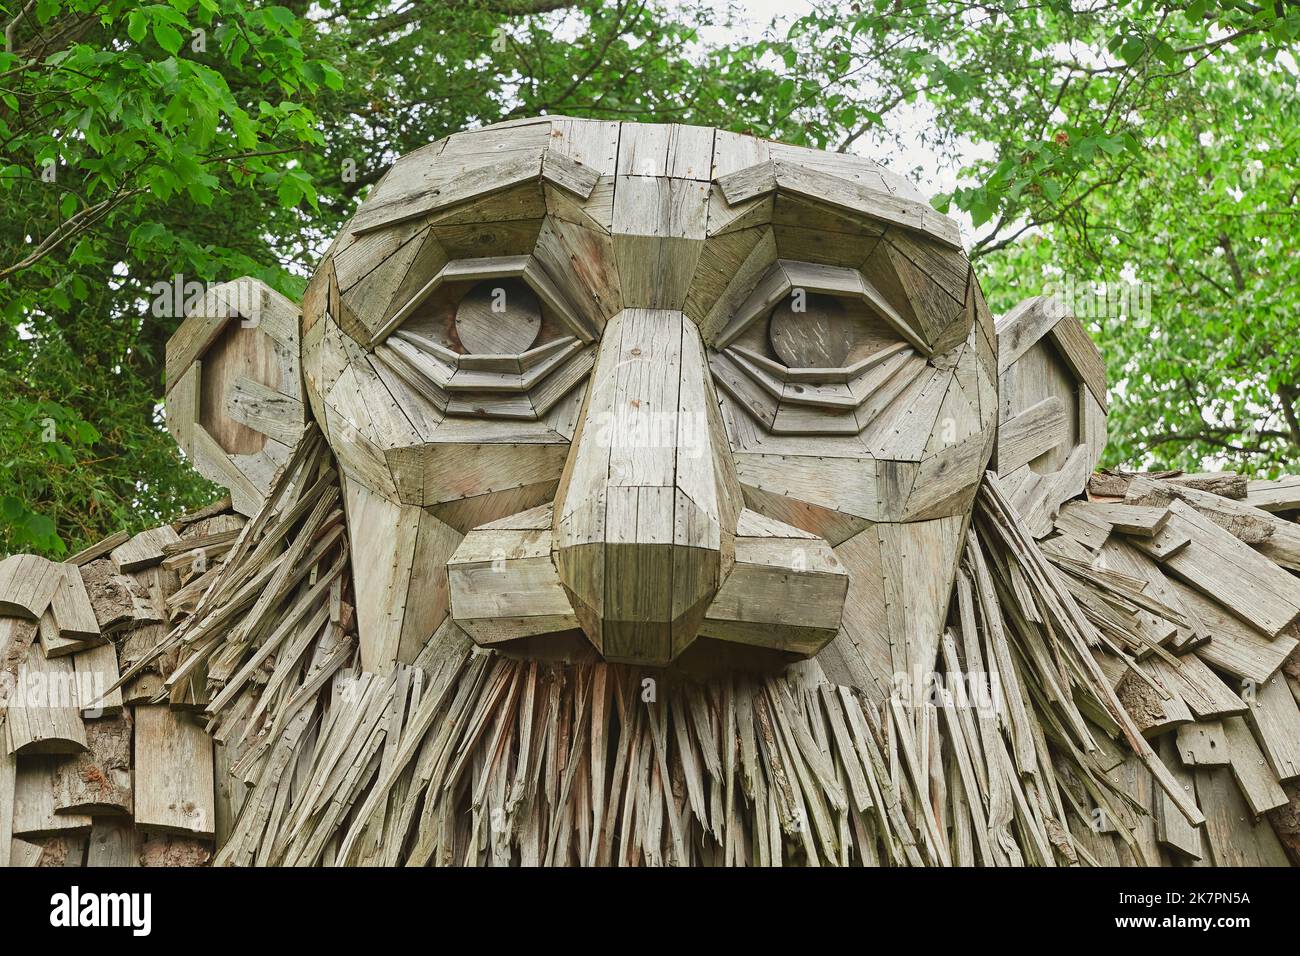 Hoje Taastrup, May, 2022: Giant wooden troll made from waste wood Stock Photo